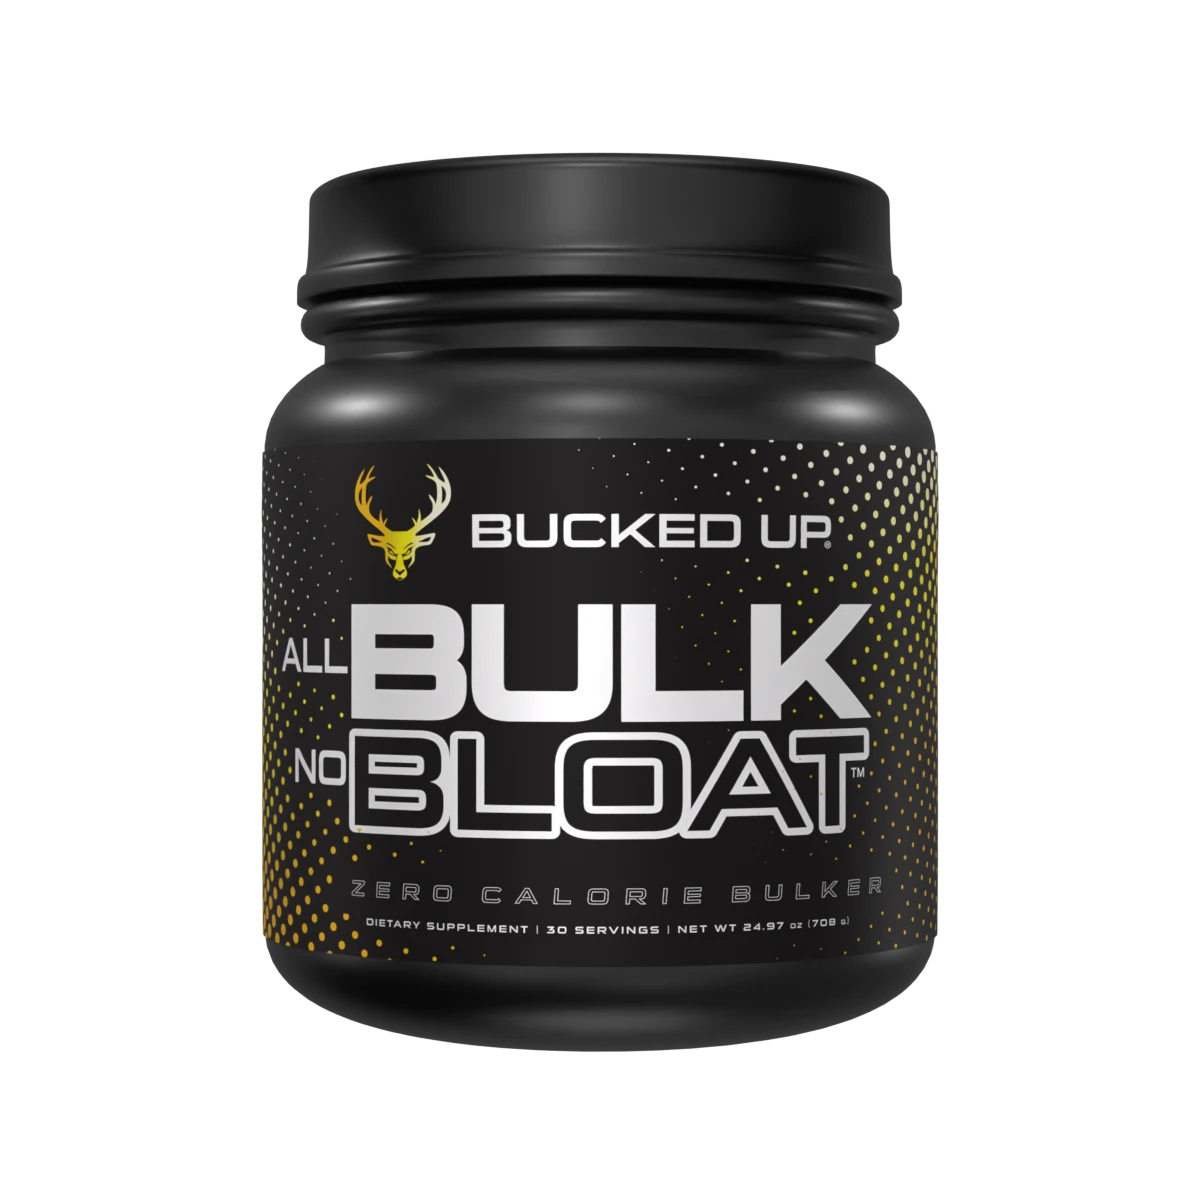 All Bulk No Bloat by Bucked Up